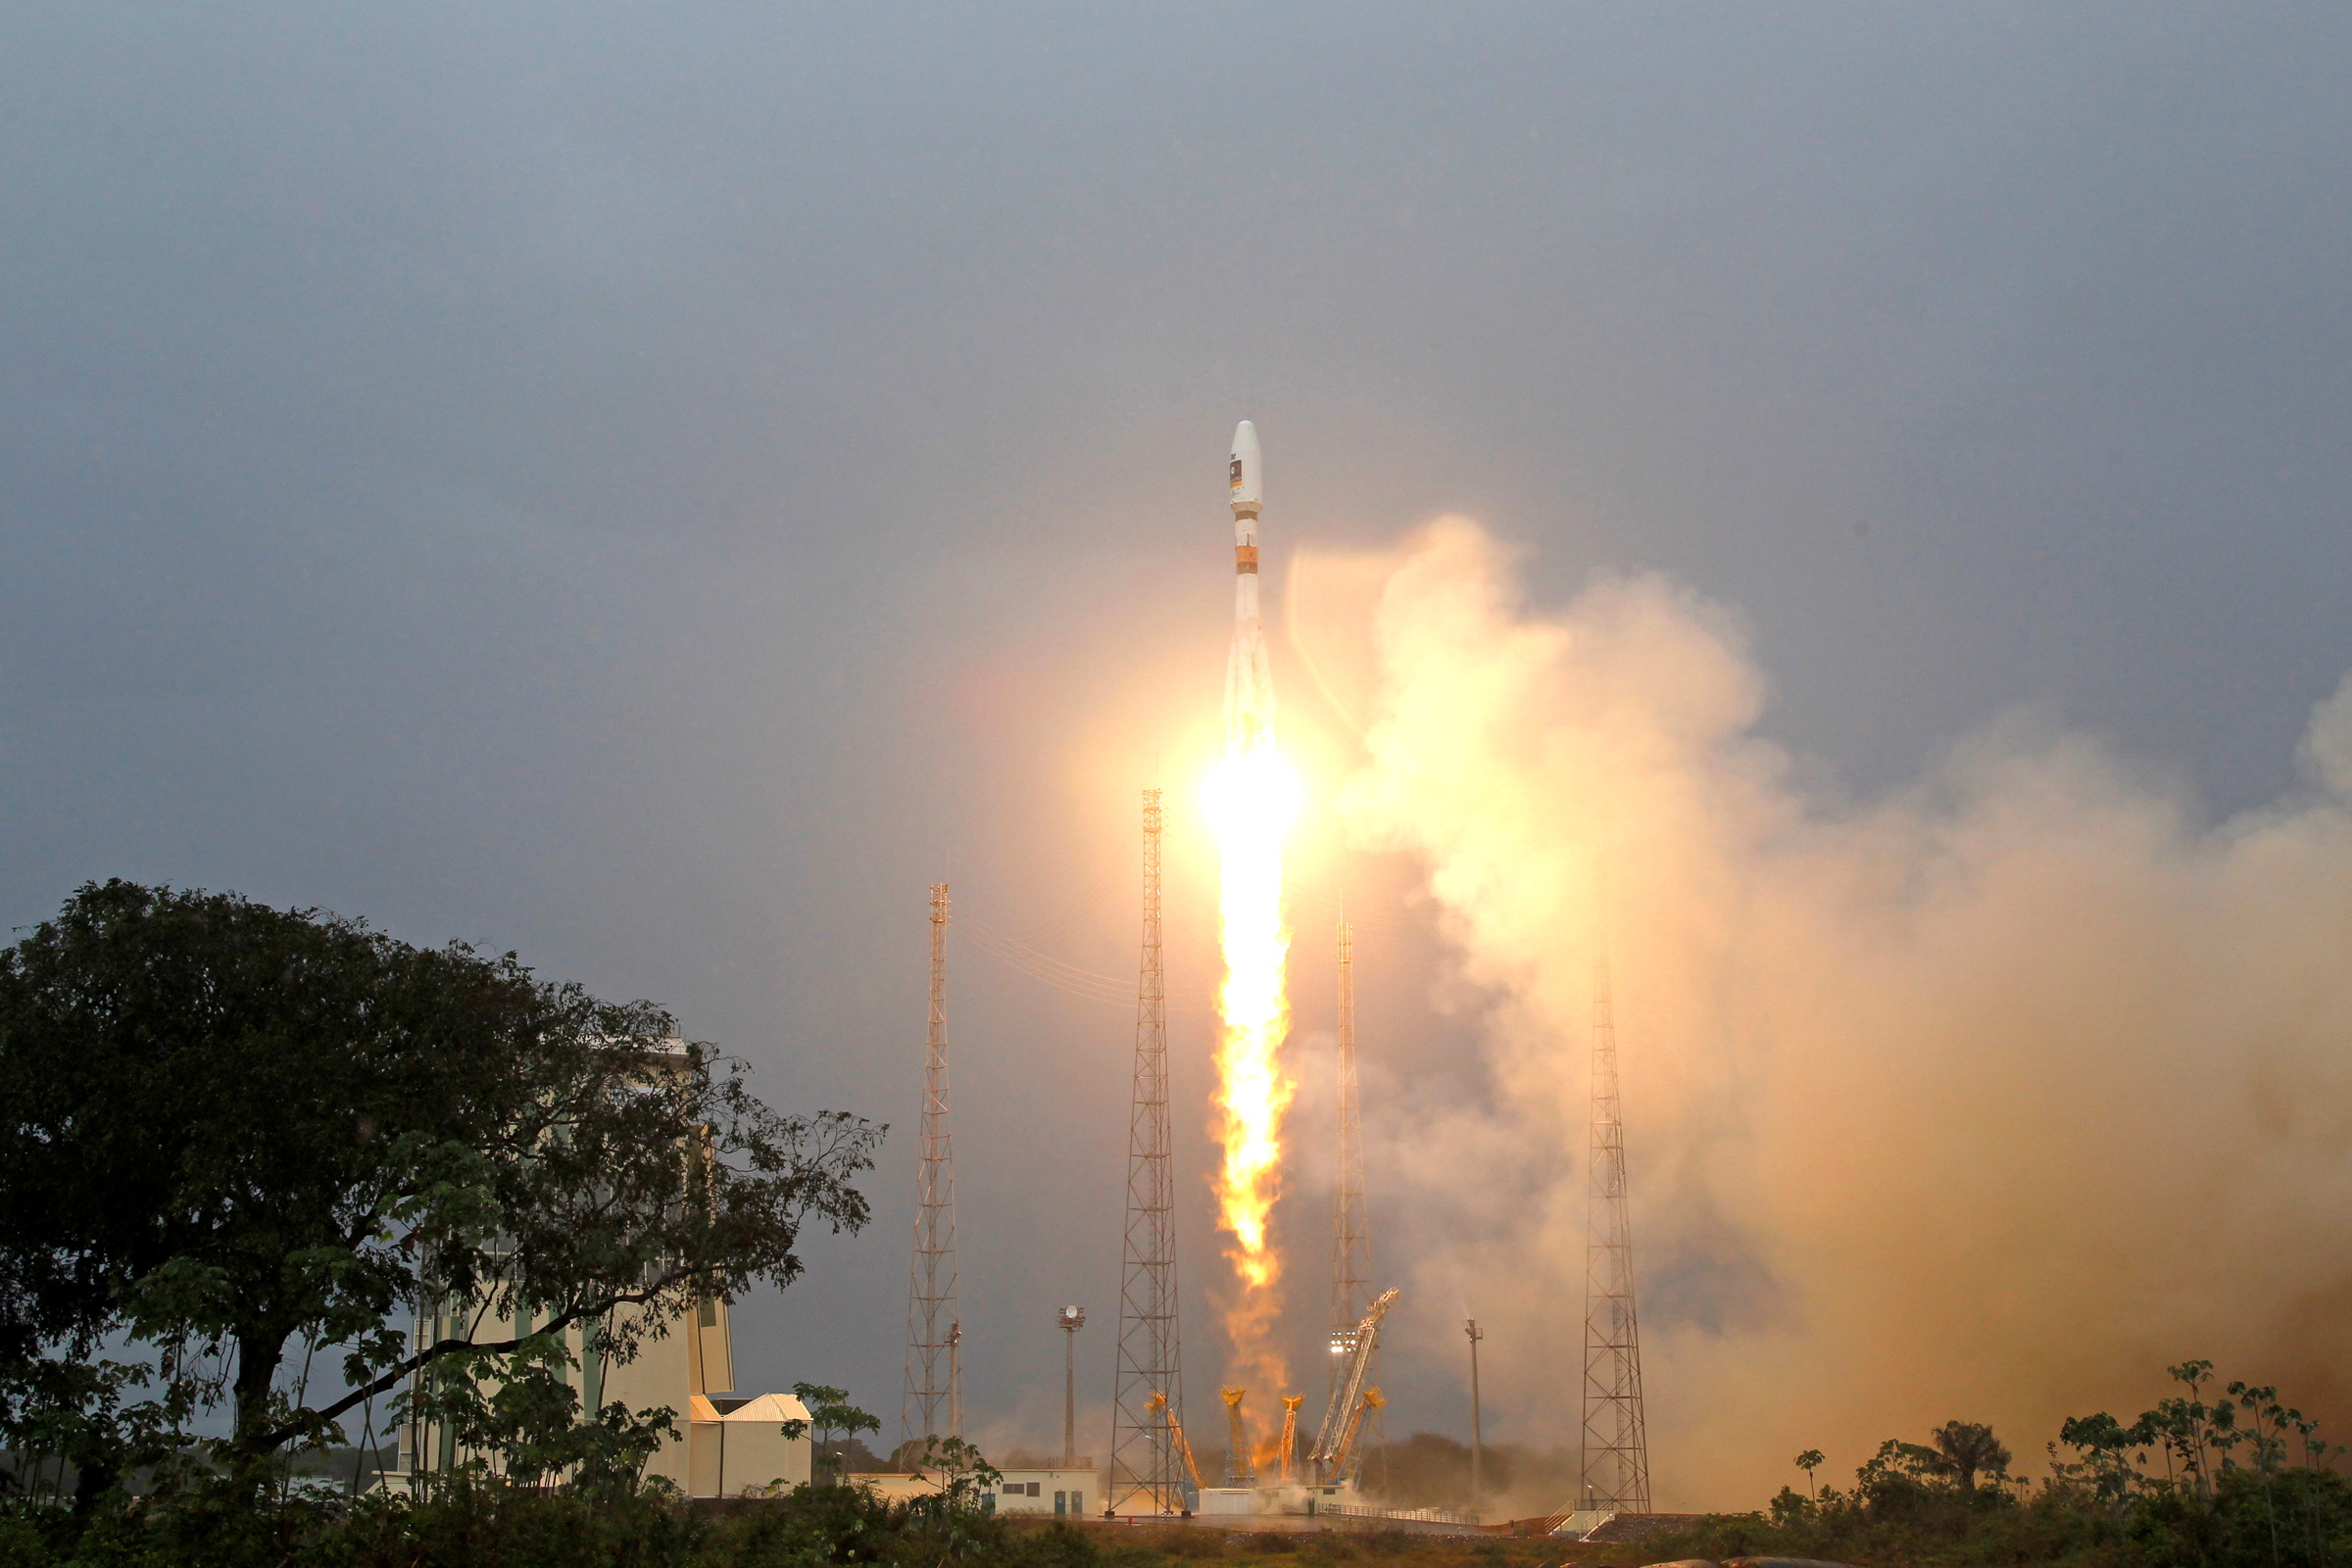 The Russian Soyuz VS01 rocket, carrying the first two satellites of Europe's Galileo navigation system, blasts off from its launchpad at the Guiana Space Center in Sinnamary